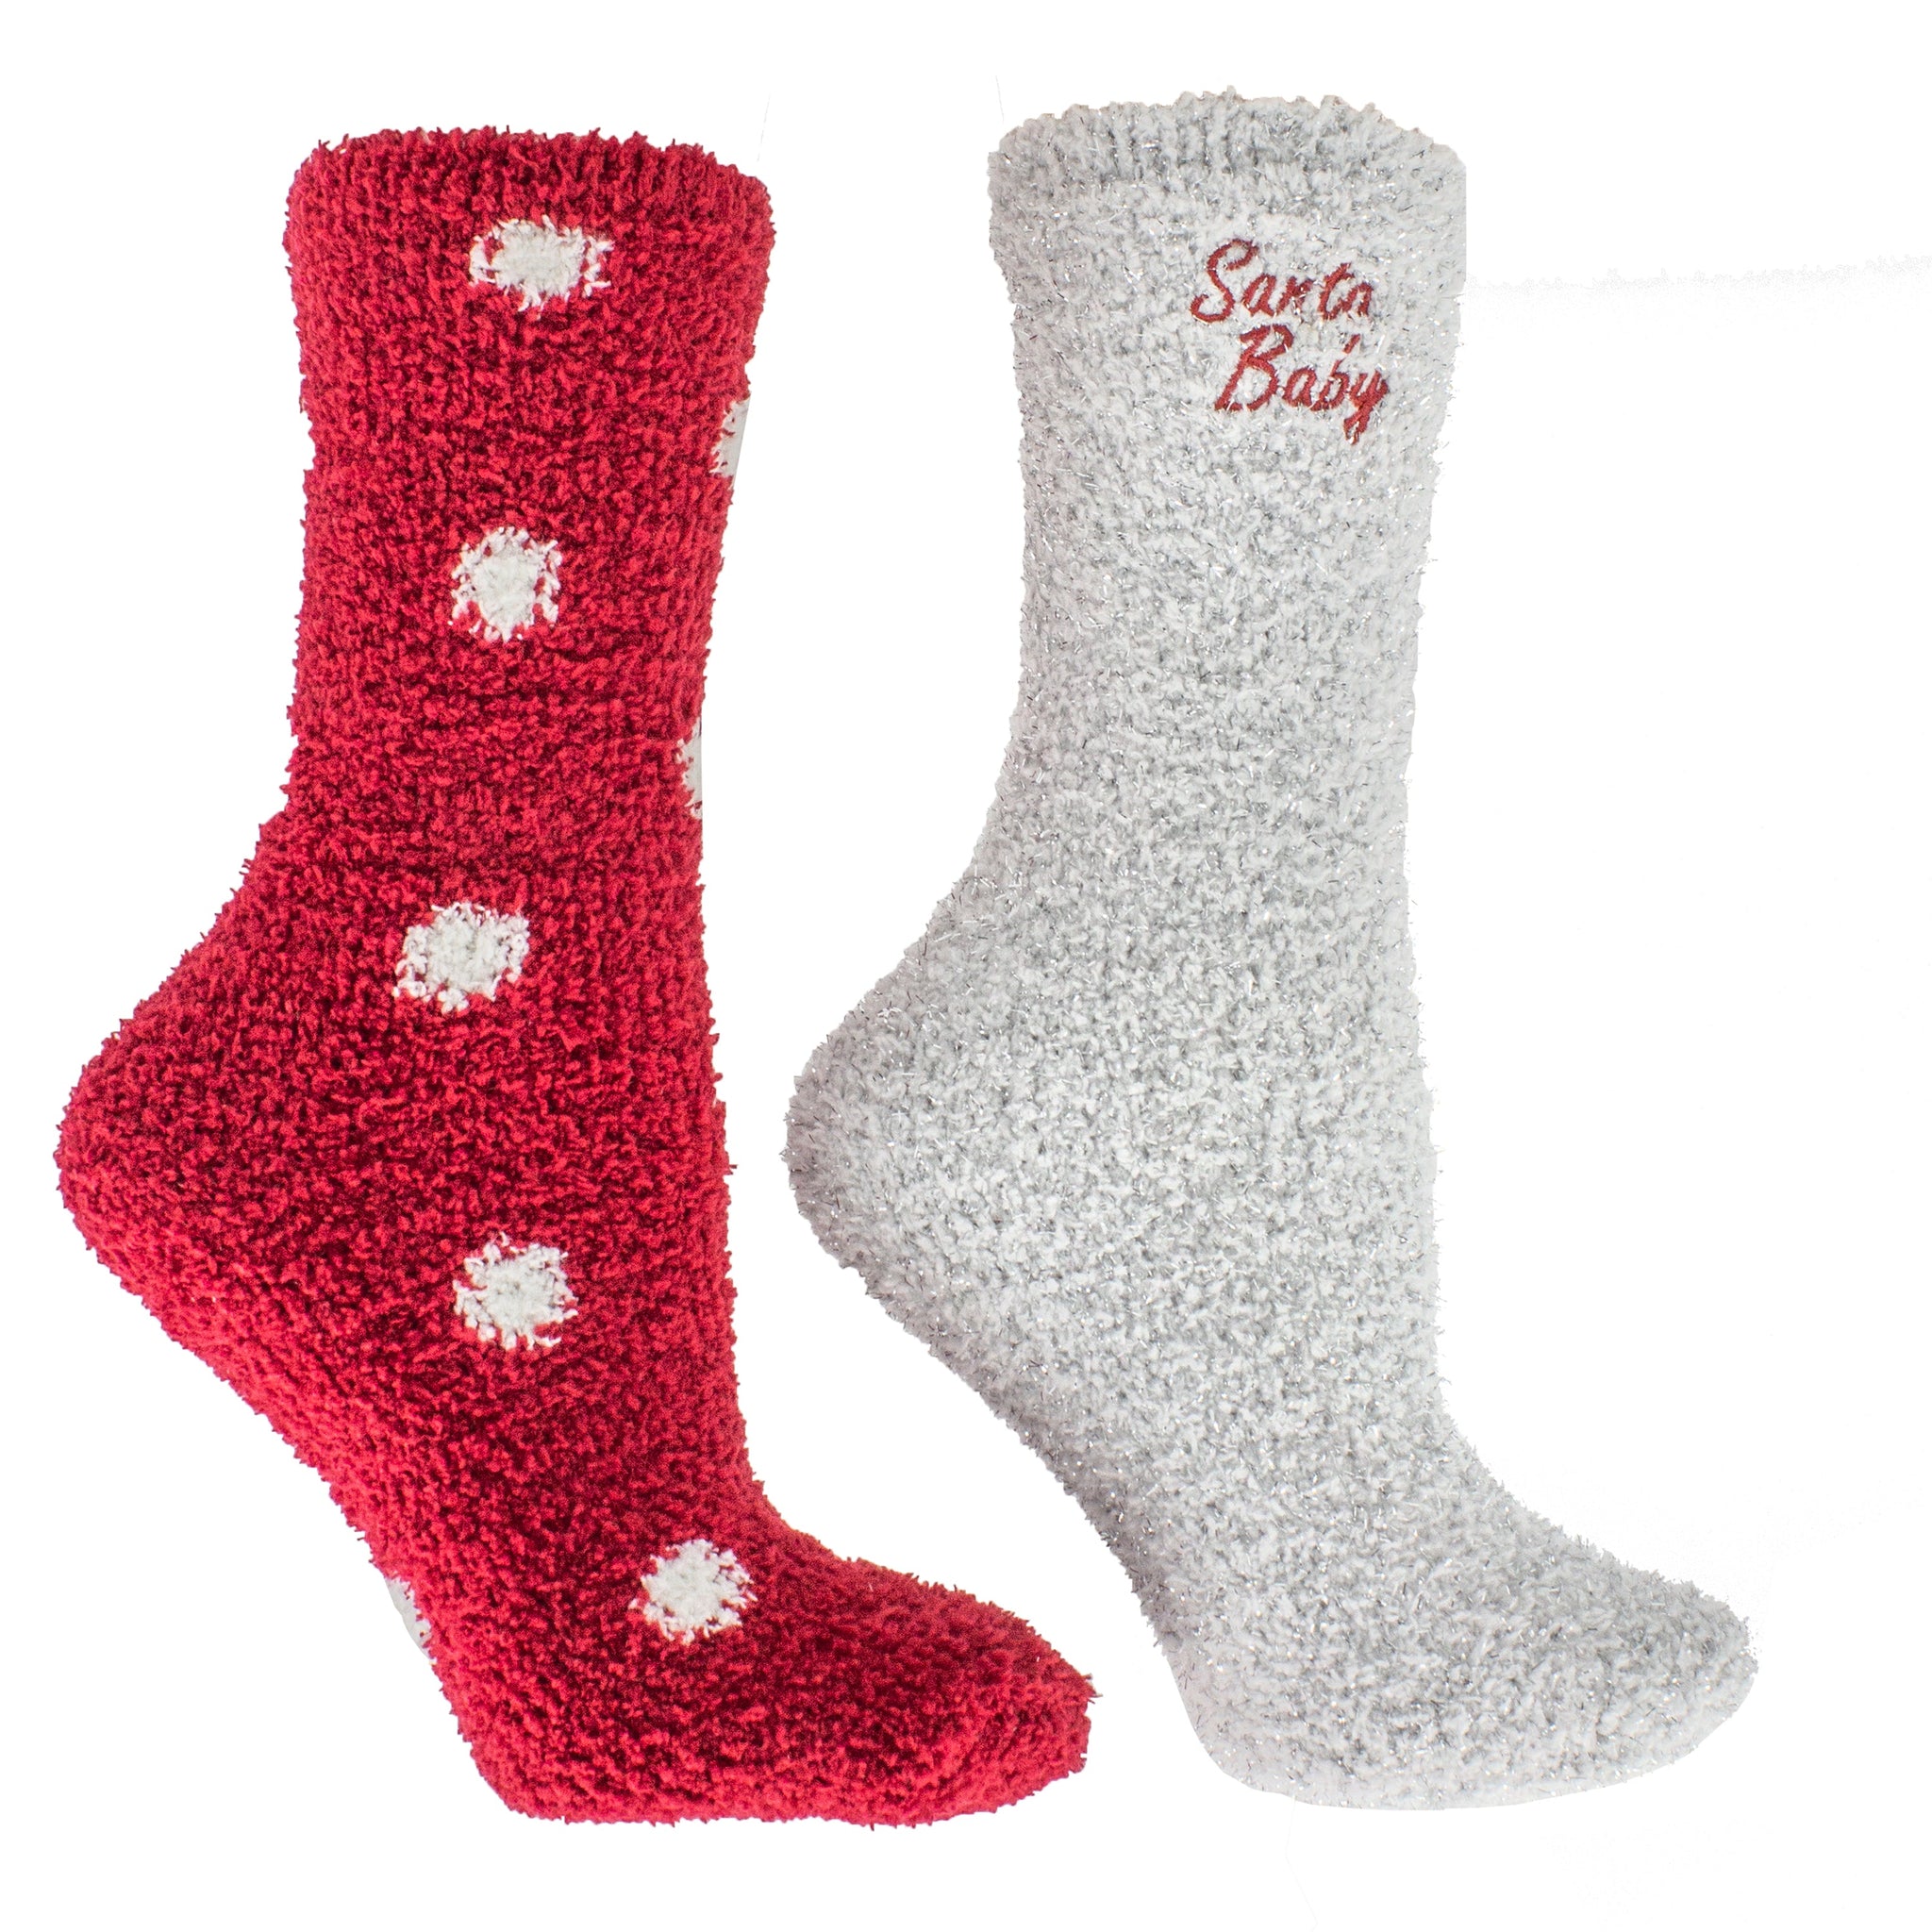 2 Pairs - Non-Skid Warm Soft and Fuzzy Eucalyptus Mint and Shea Butter Infused Slipper Socks with Sachet Christmas Gift